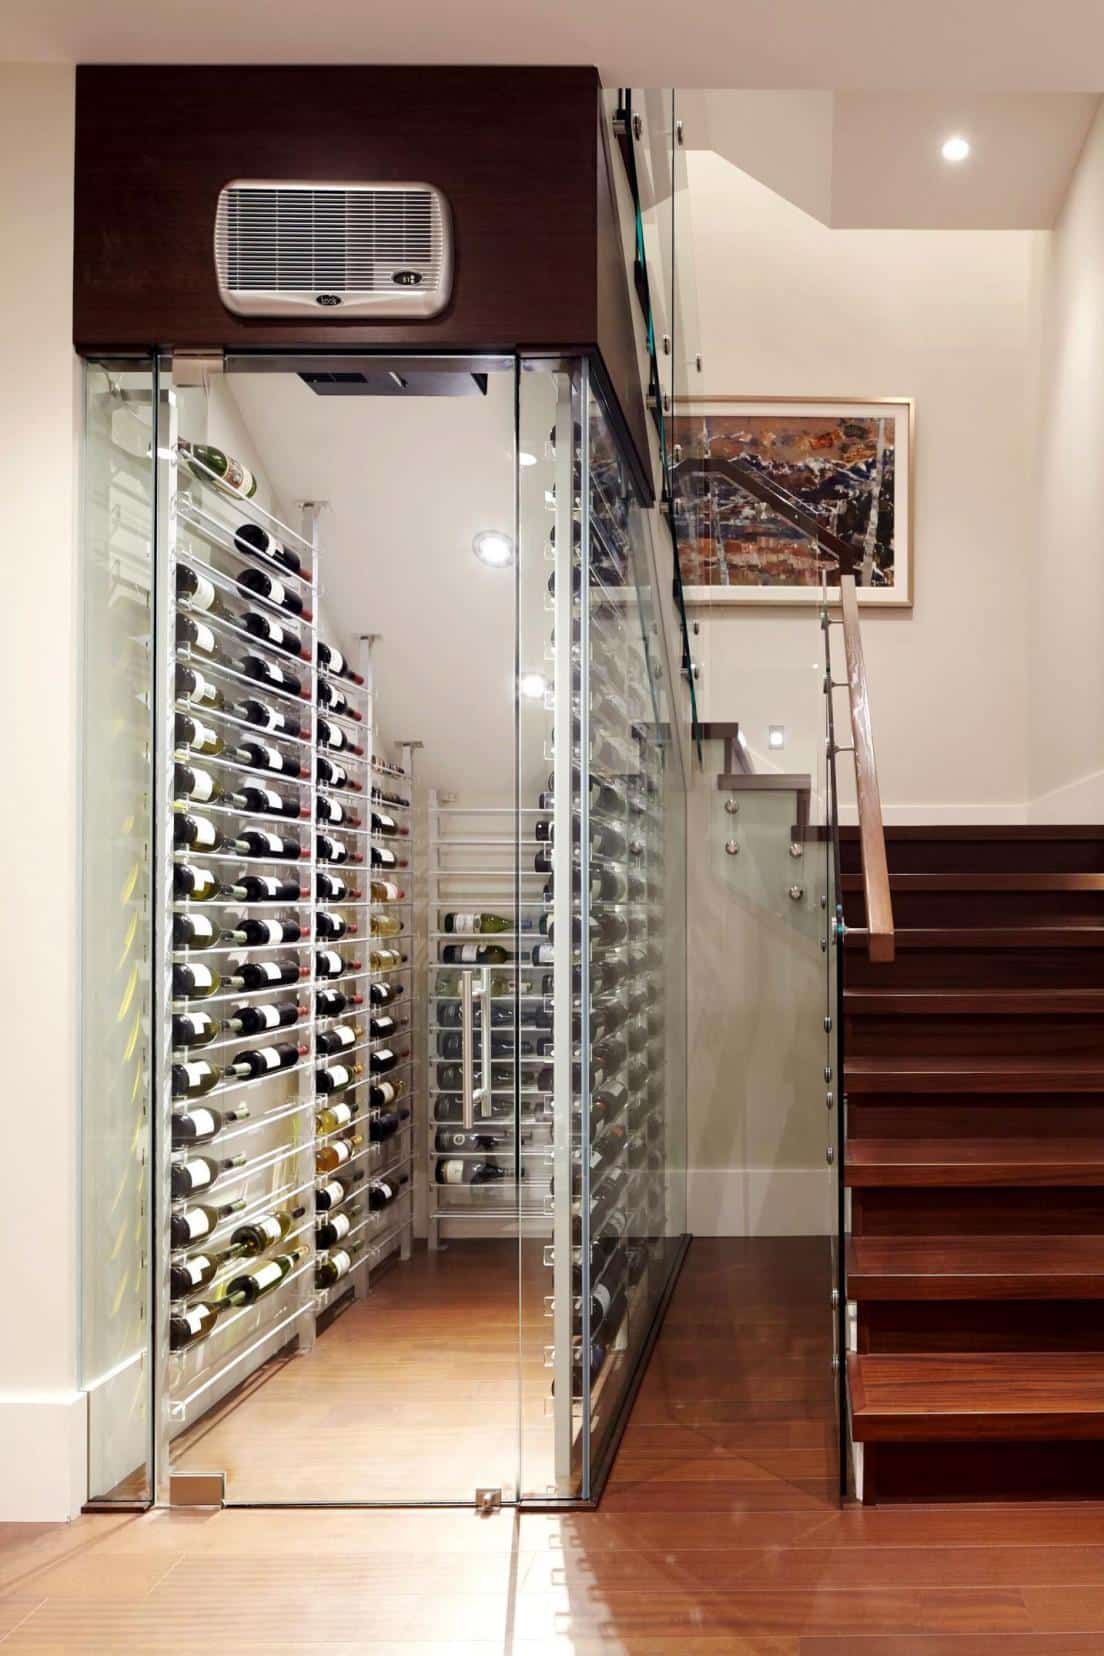 Modern Glass Wine Cellars Under the Stairs Add a Luxurious Feature to Homes and Commercial Establishments